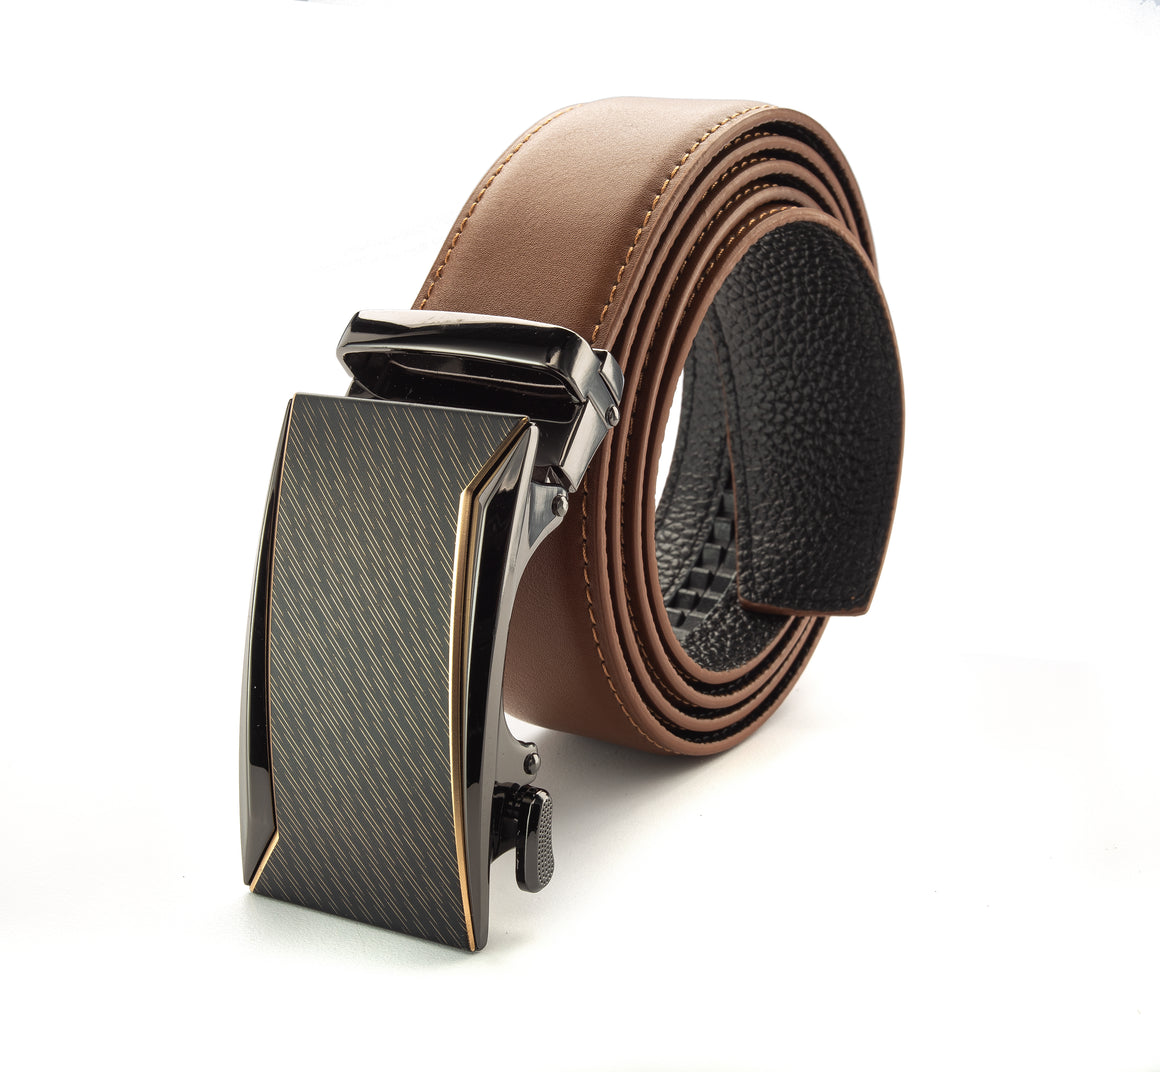 Elevate your style, formal or casual, with Royal's opulent Men's Leather Track Belts | BELT-33